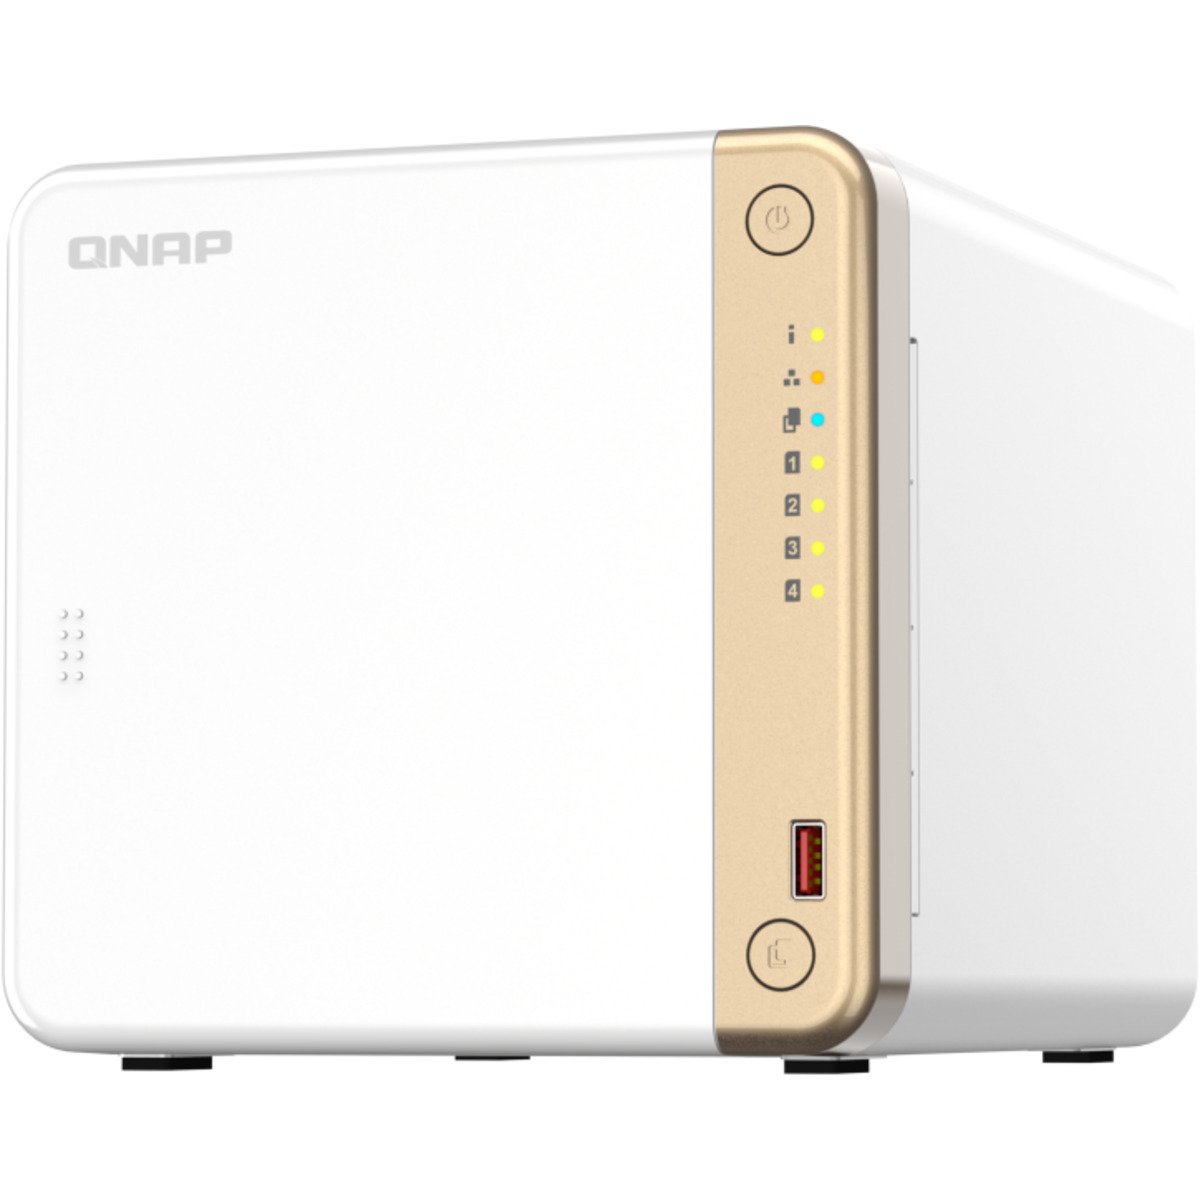 QNAP TS-462 40tb 4-Bay Desktop Multimedia / Power User / Business NAS - Network Attached Storage Device 4x10tb Seagate EXOS X18 ST10000NM018G 3.5 7200rpm SATA 6Gb/s HDD ENTERPRISE Class Drives Installed - Burn-In Tested - ON SALE TS-462